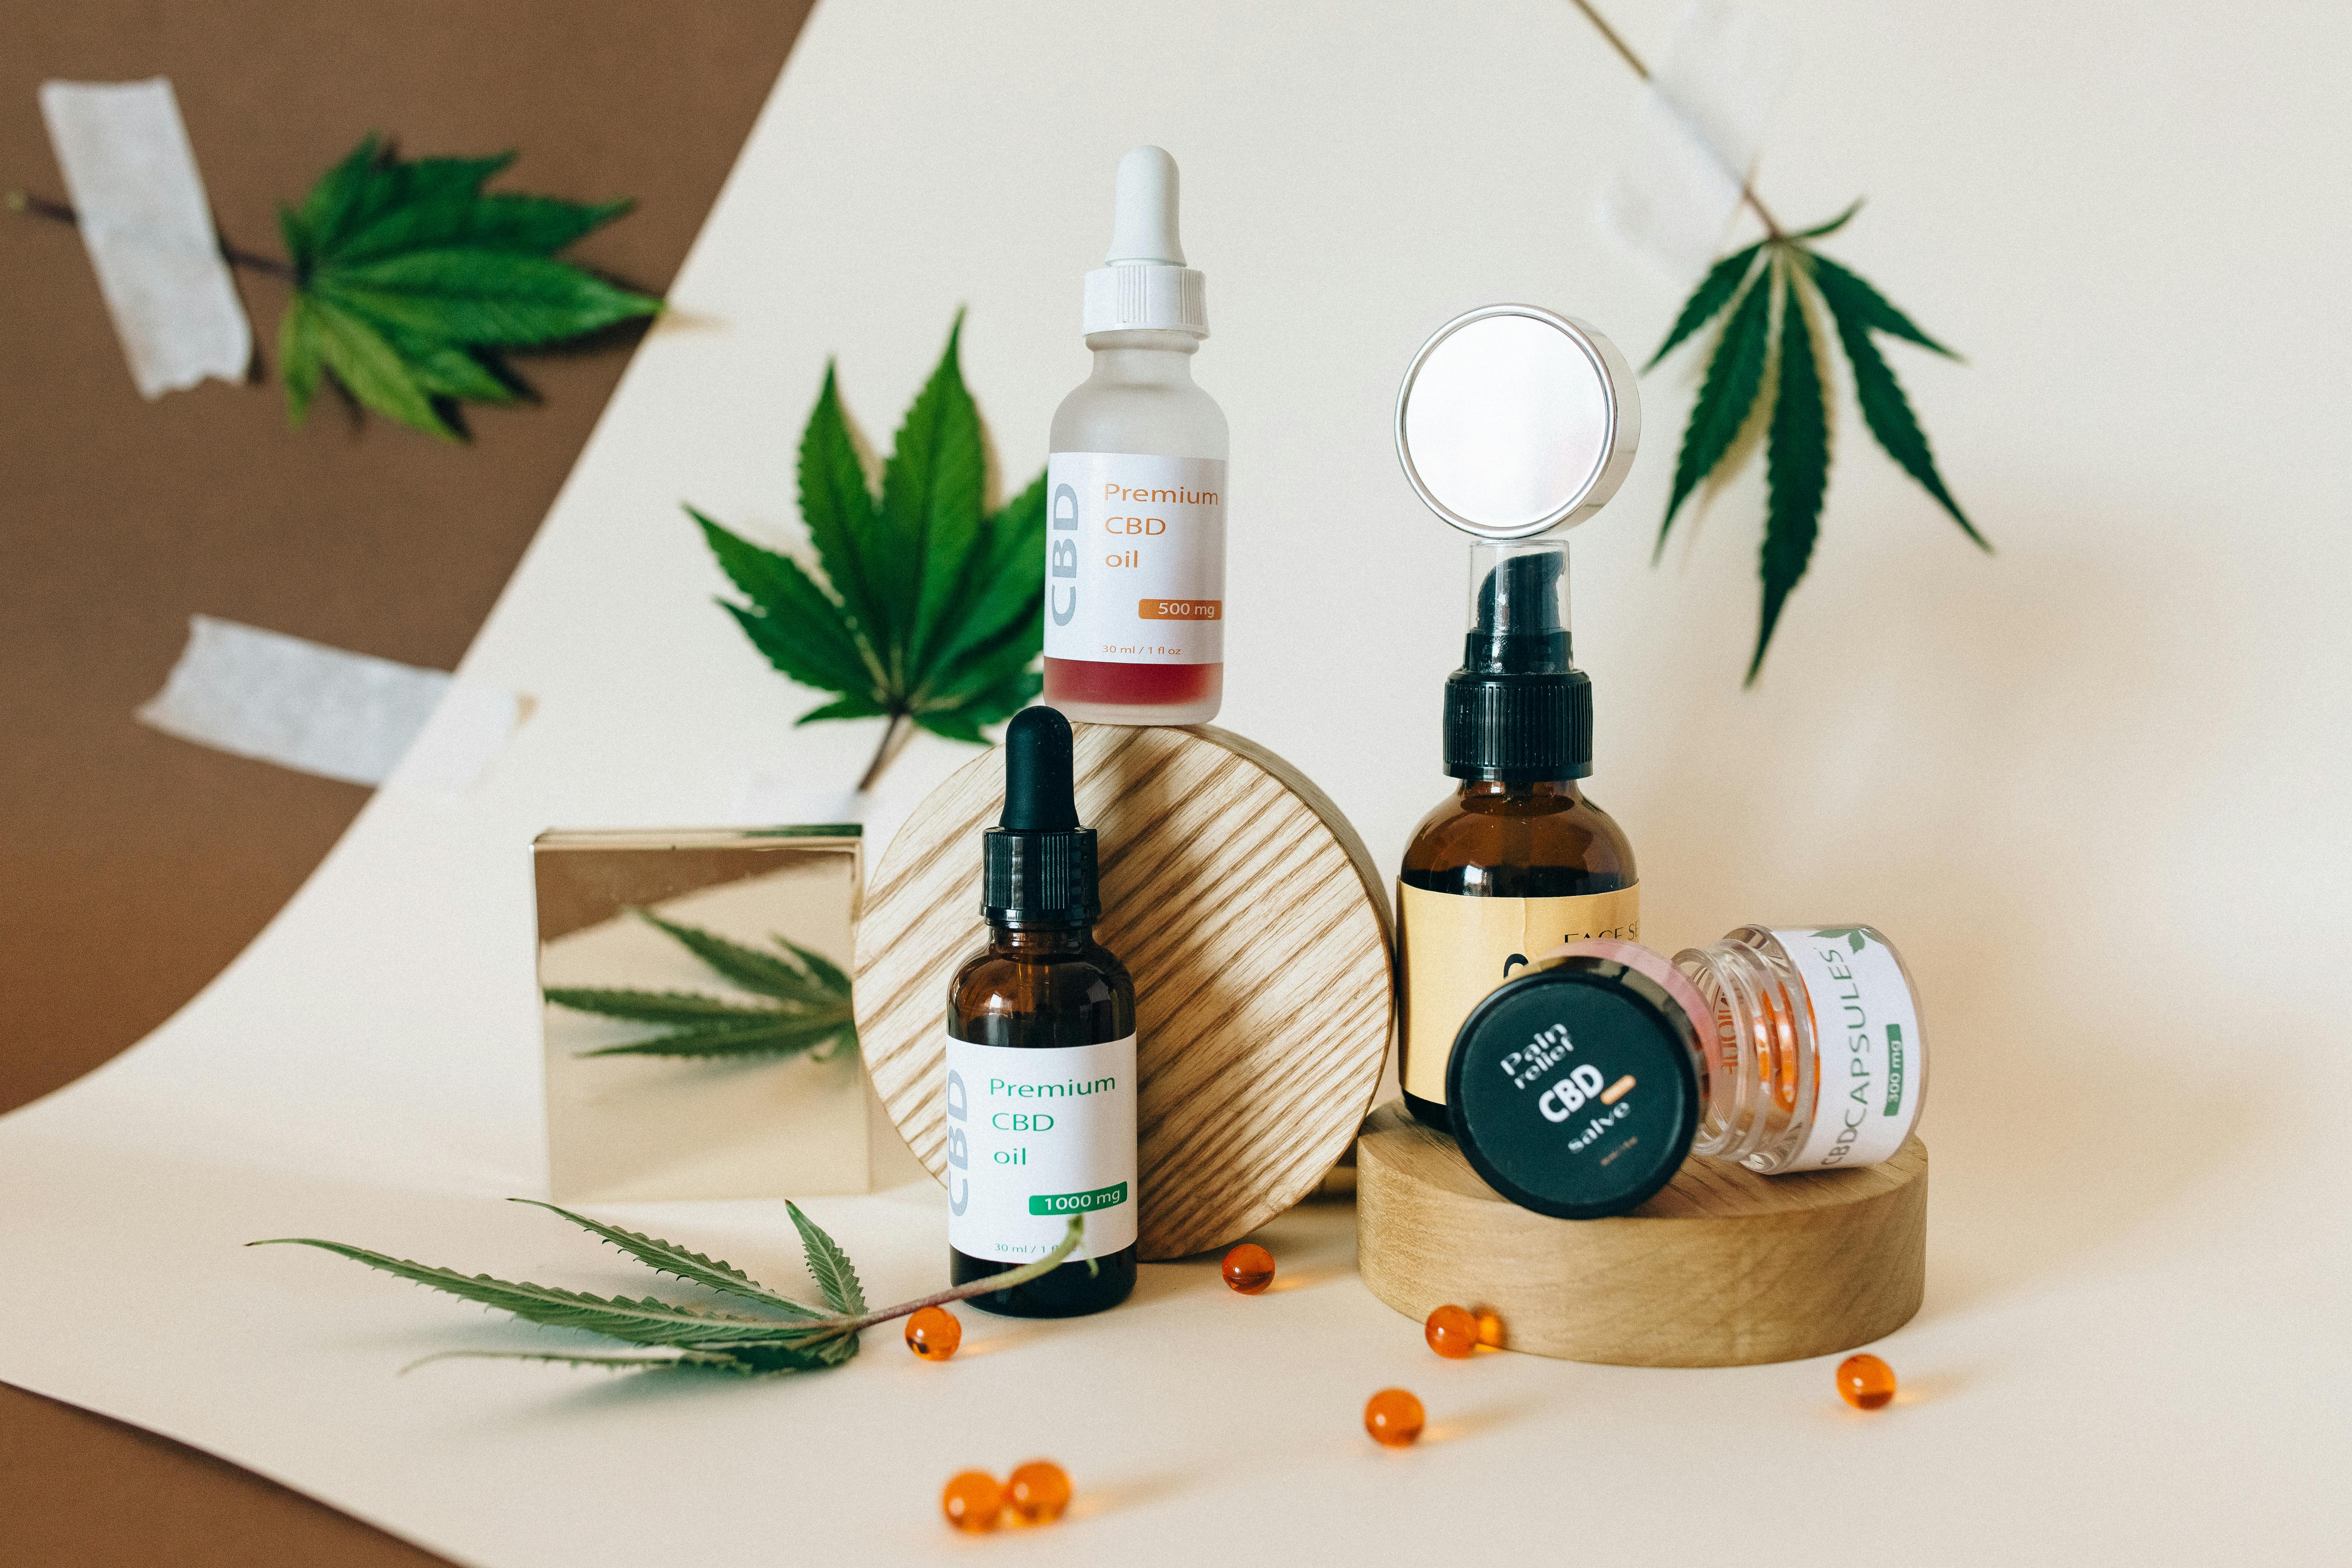 Easy to Operate Boutique Style CBD Franchise